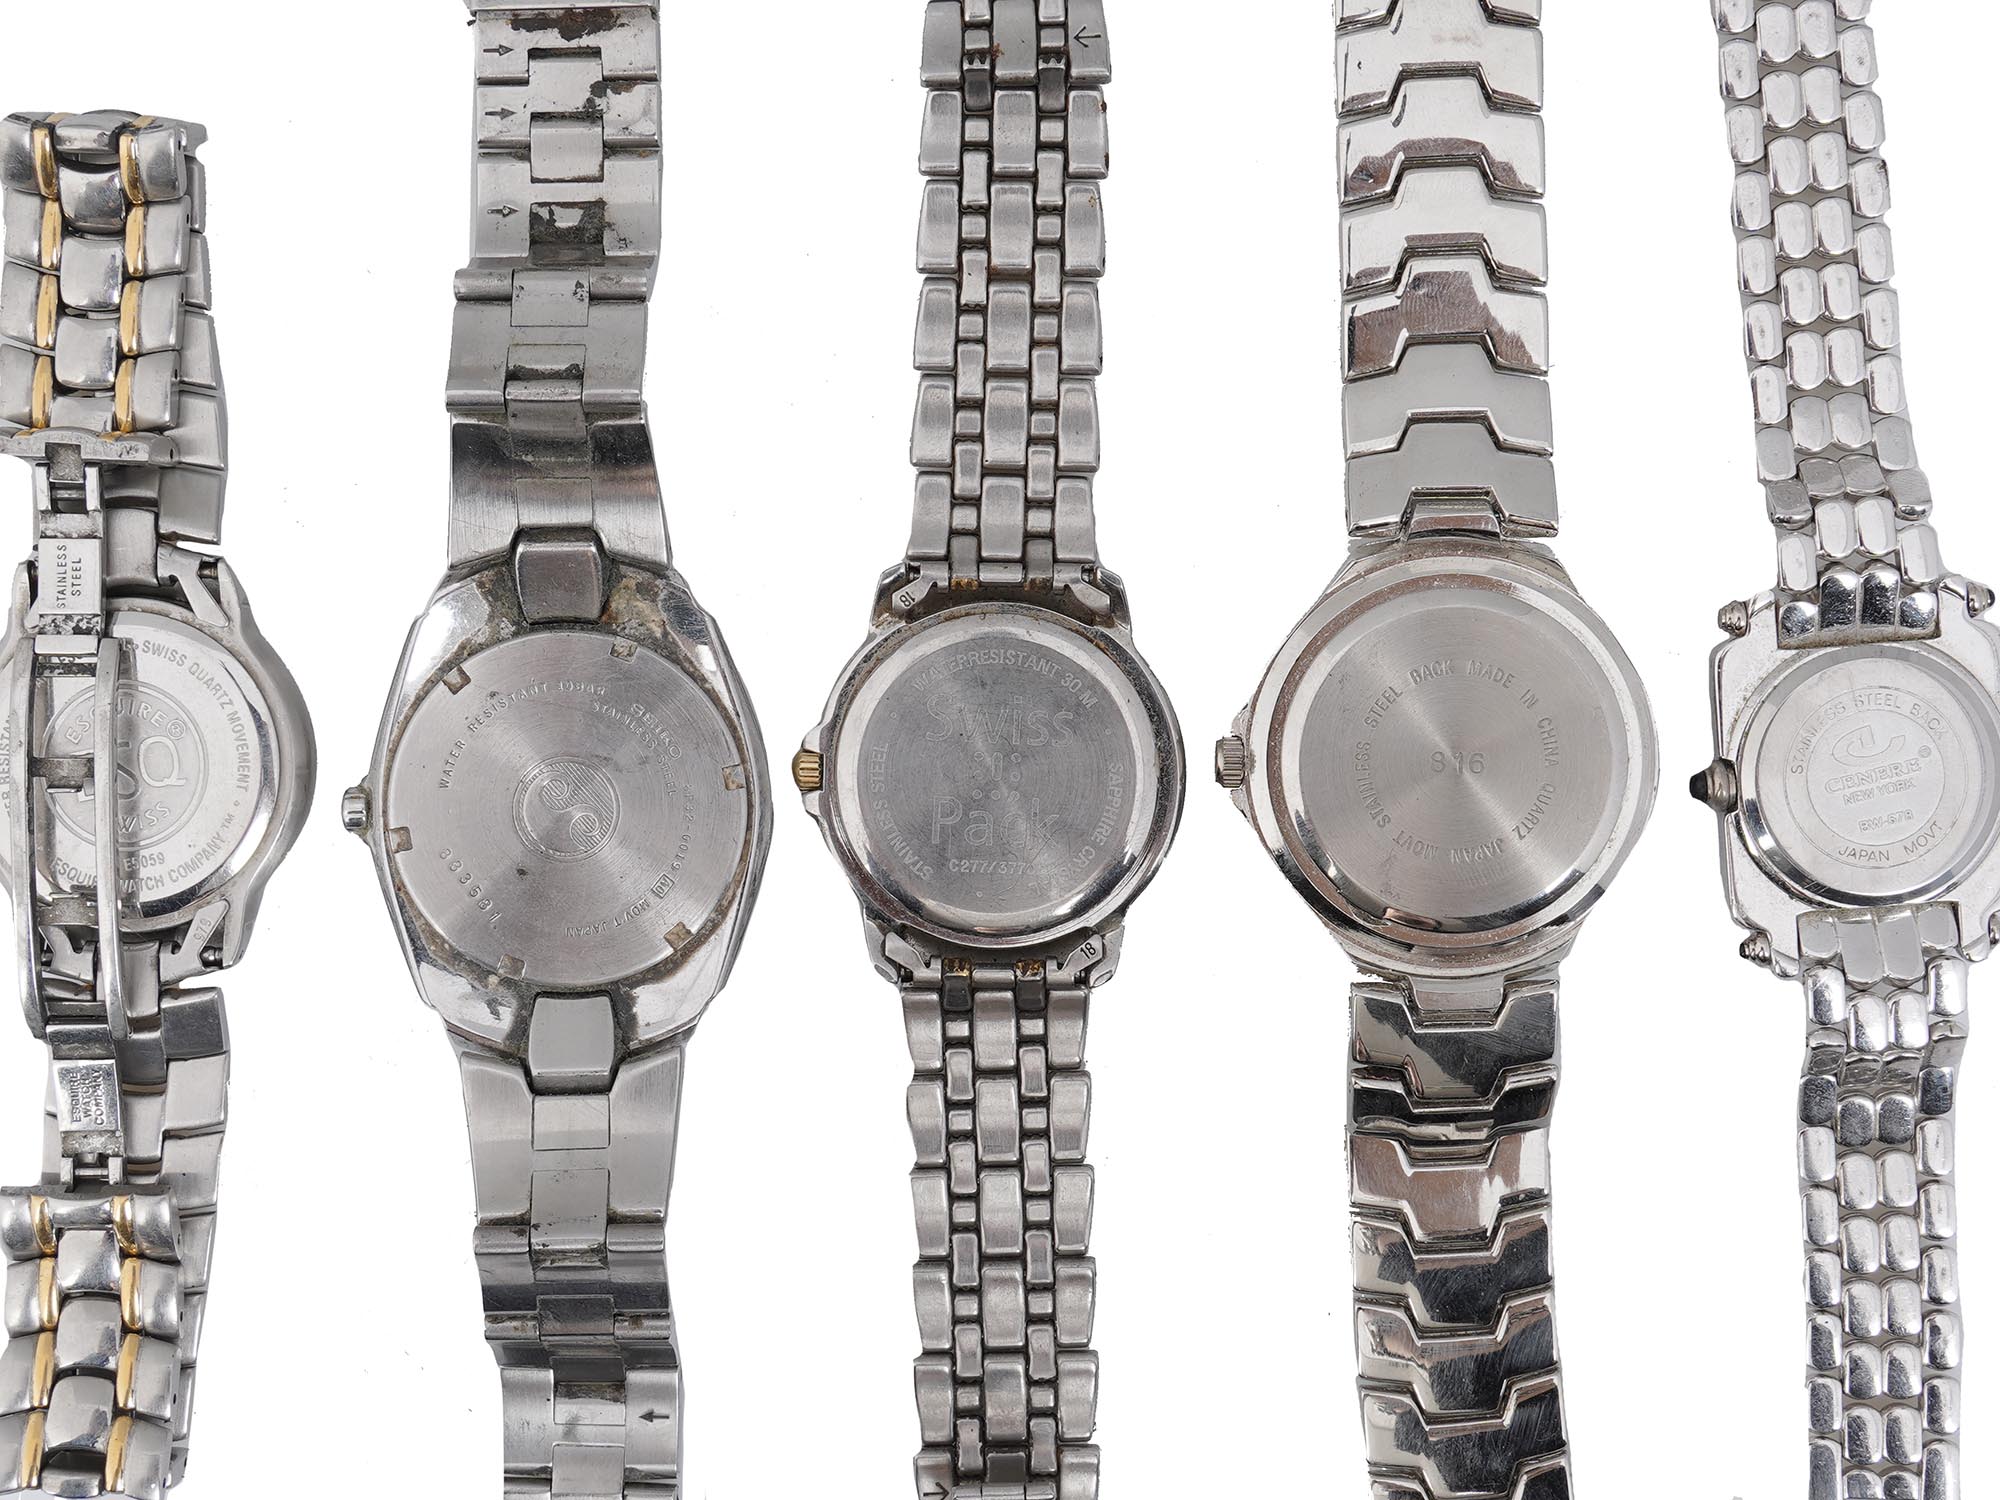 LARGE COLLECTION OF VINTAGE MODERN WRIST WATCHES PIC-7